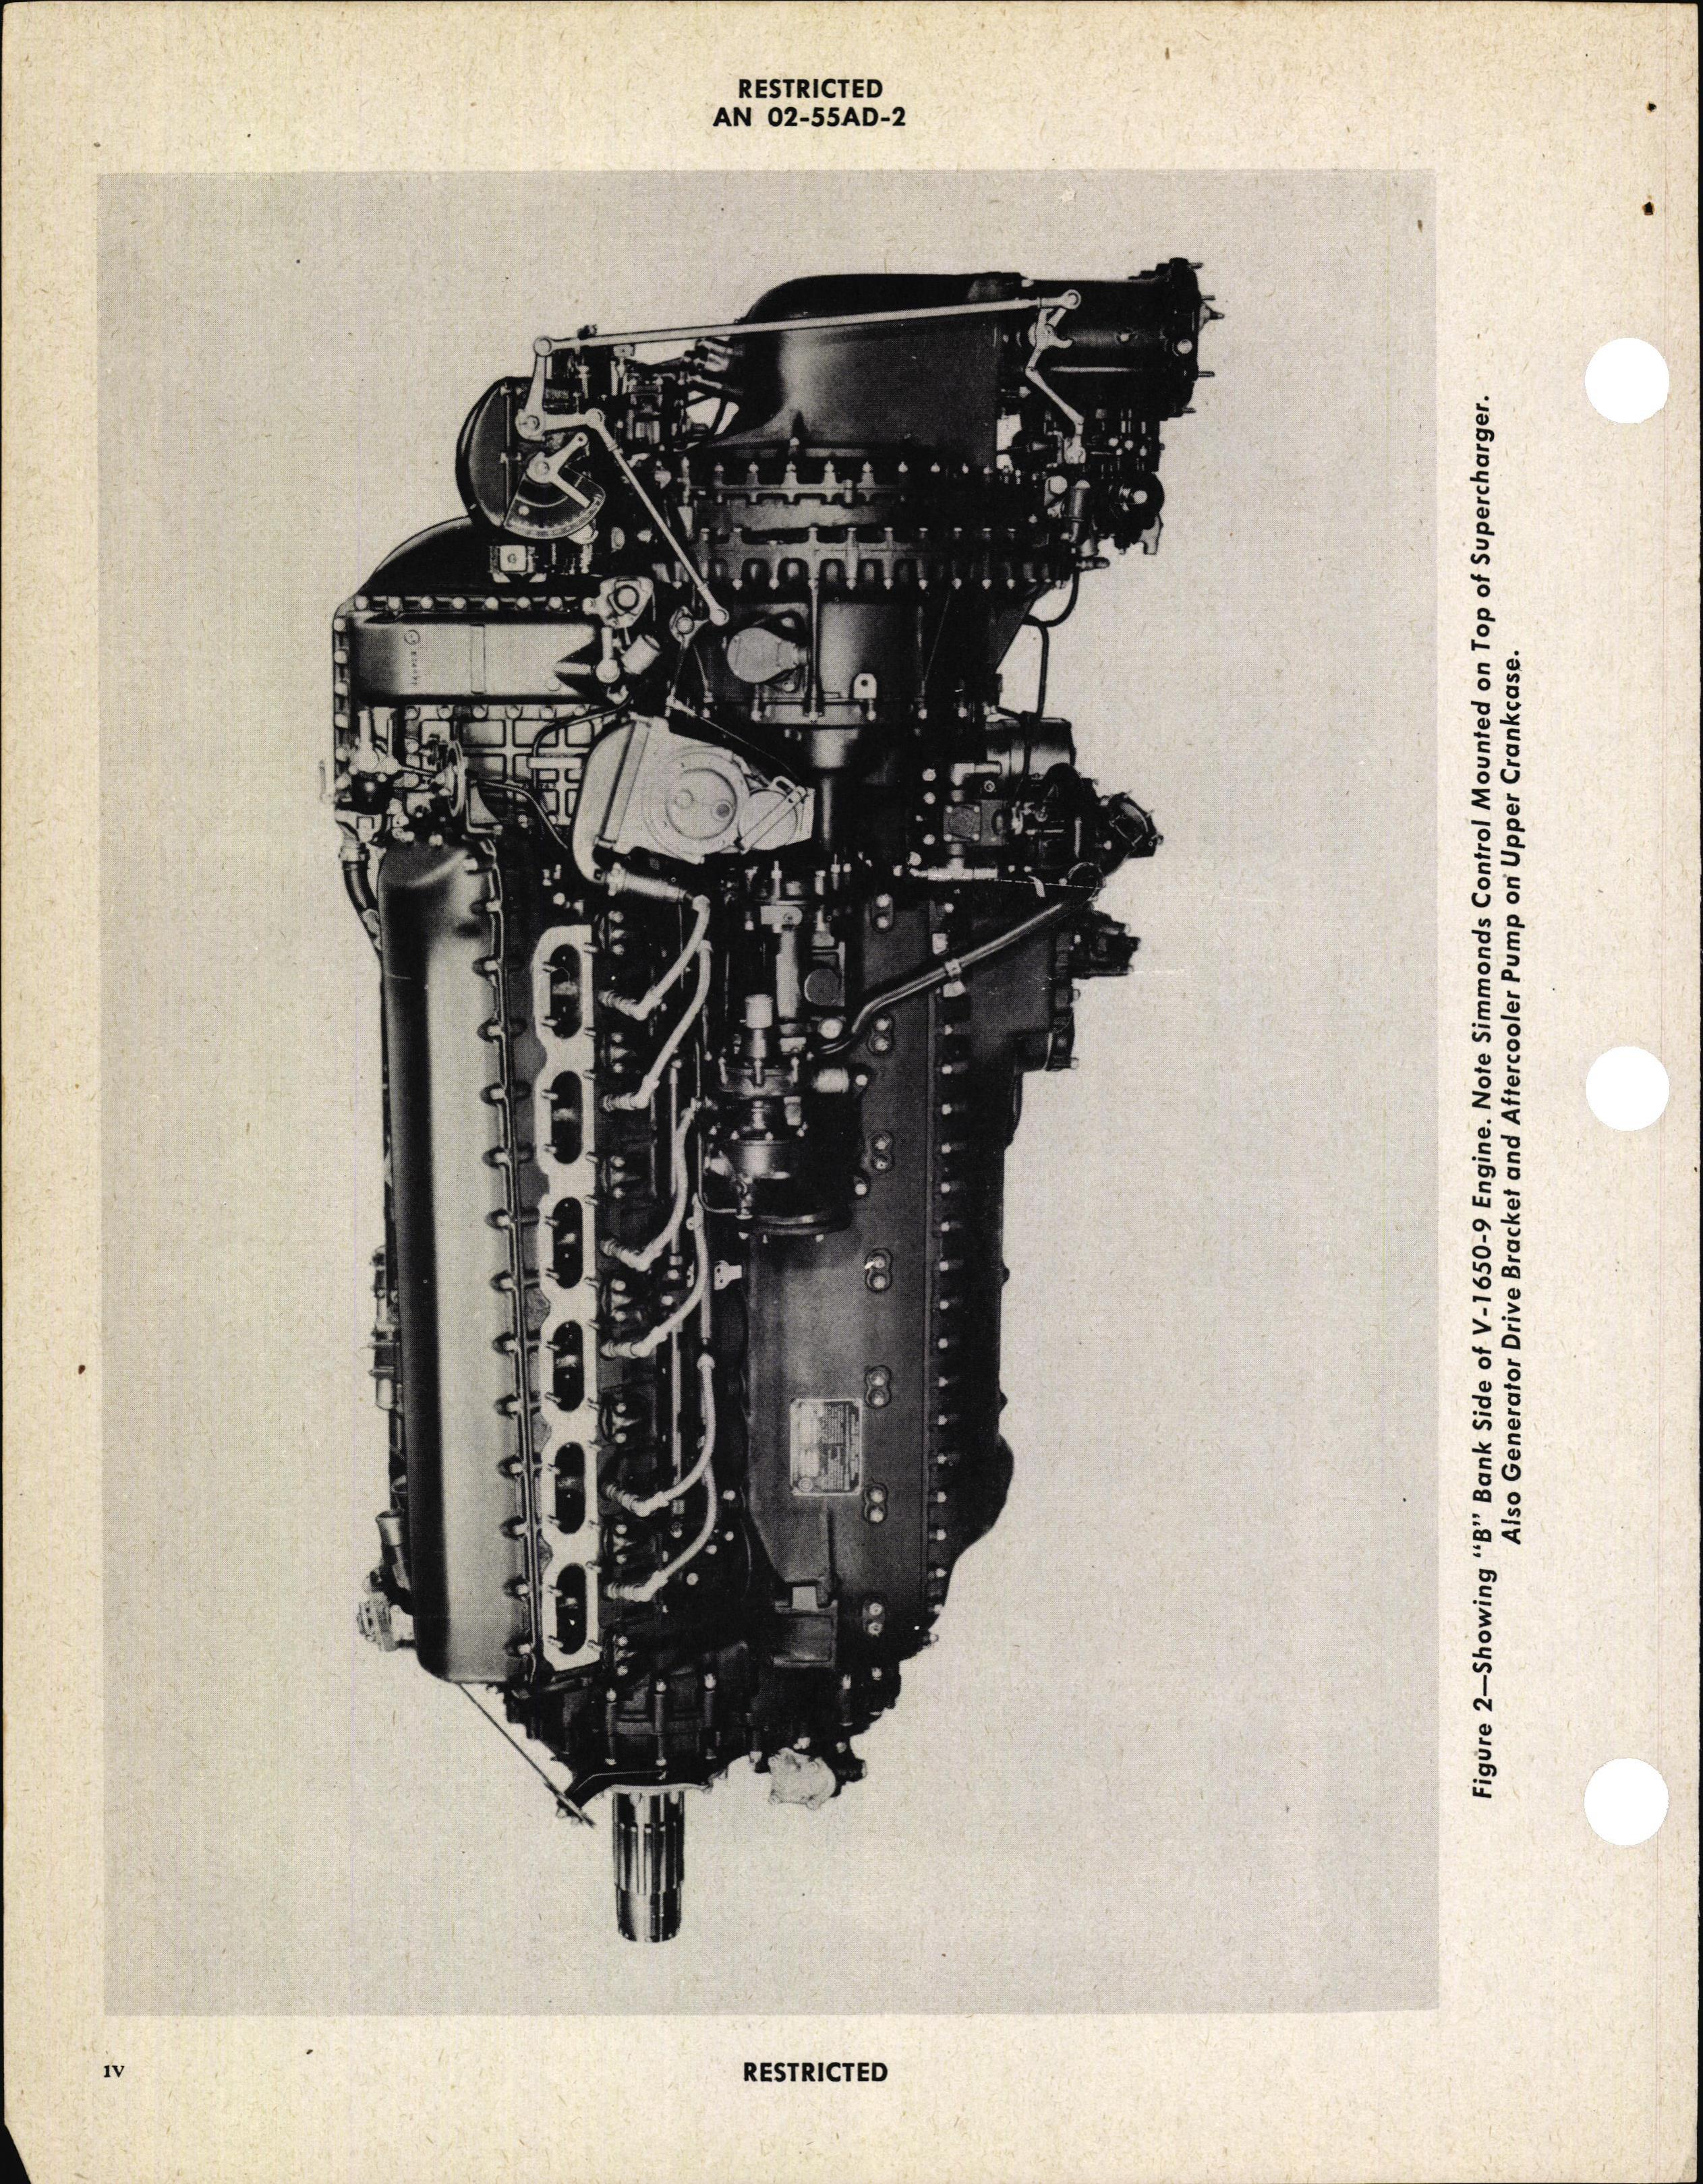 Sample page 6 from AirCorps Library document: Service Instructions for Model V-1650-9 Aircraft Engines